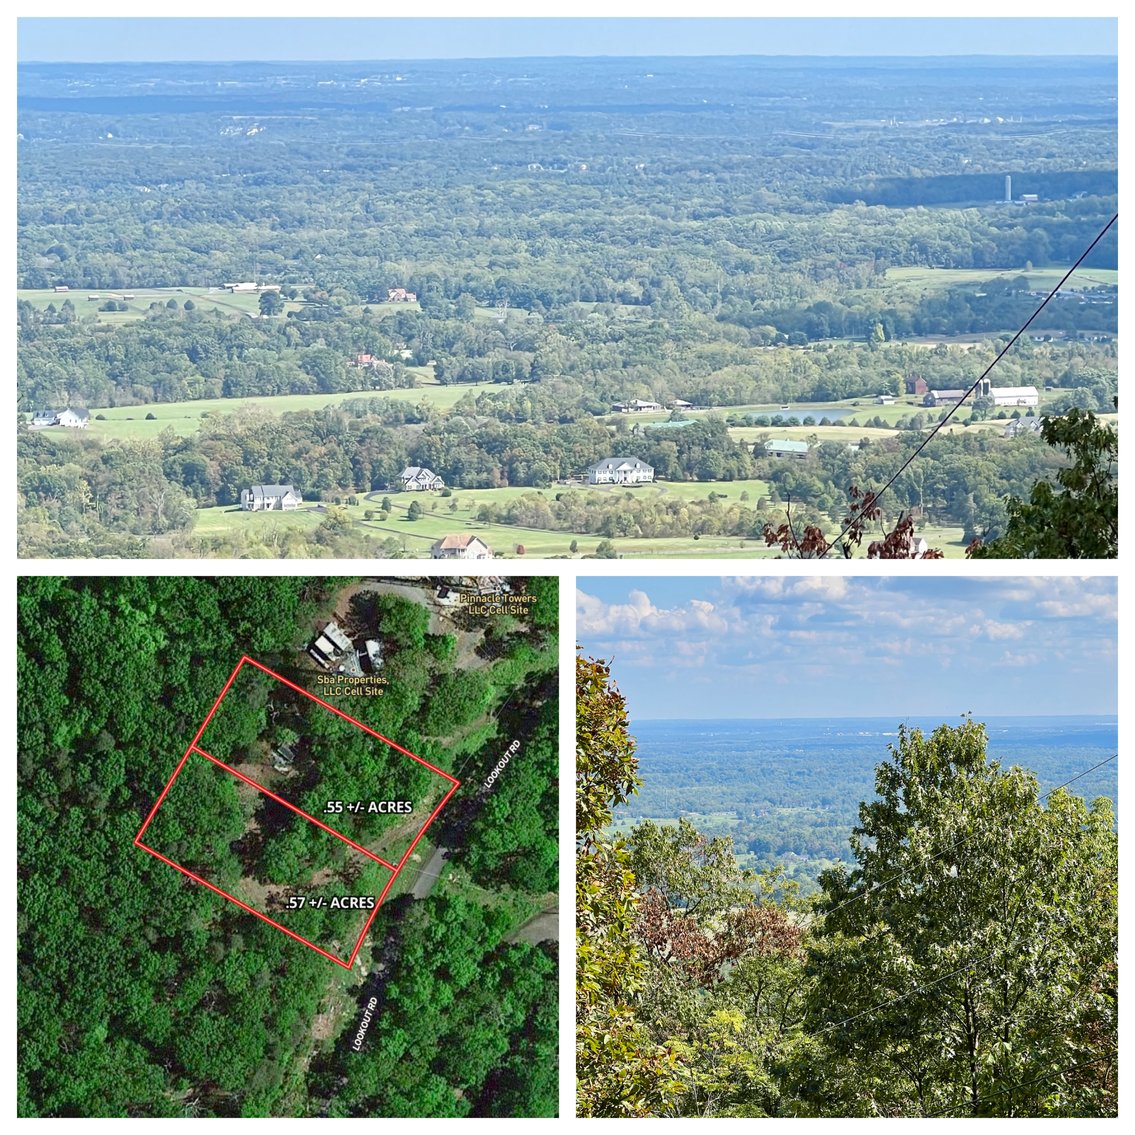 Image for 2 Lots Totaling 1.12 +/- Acres w/AMAZING Views on Top of Bull Run Mountain in Prince William County, VA--SELLING to the HIGHEST BIDDER via ONLINE ONLY BIDDING!!